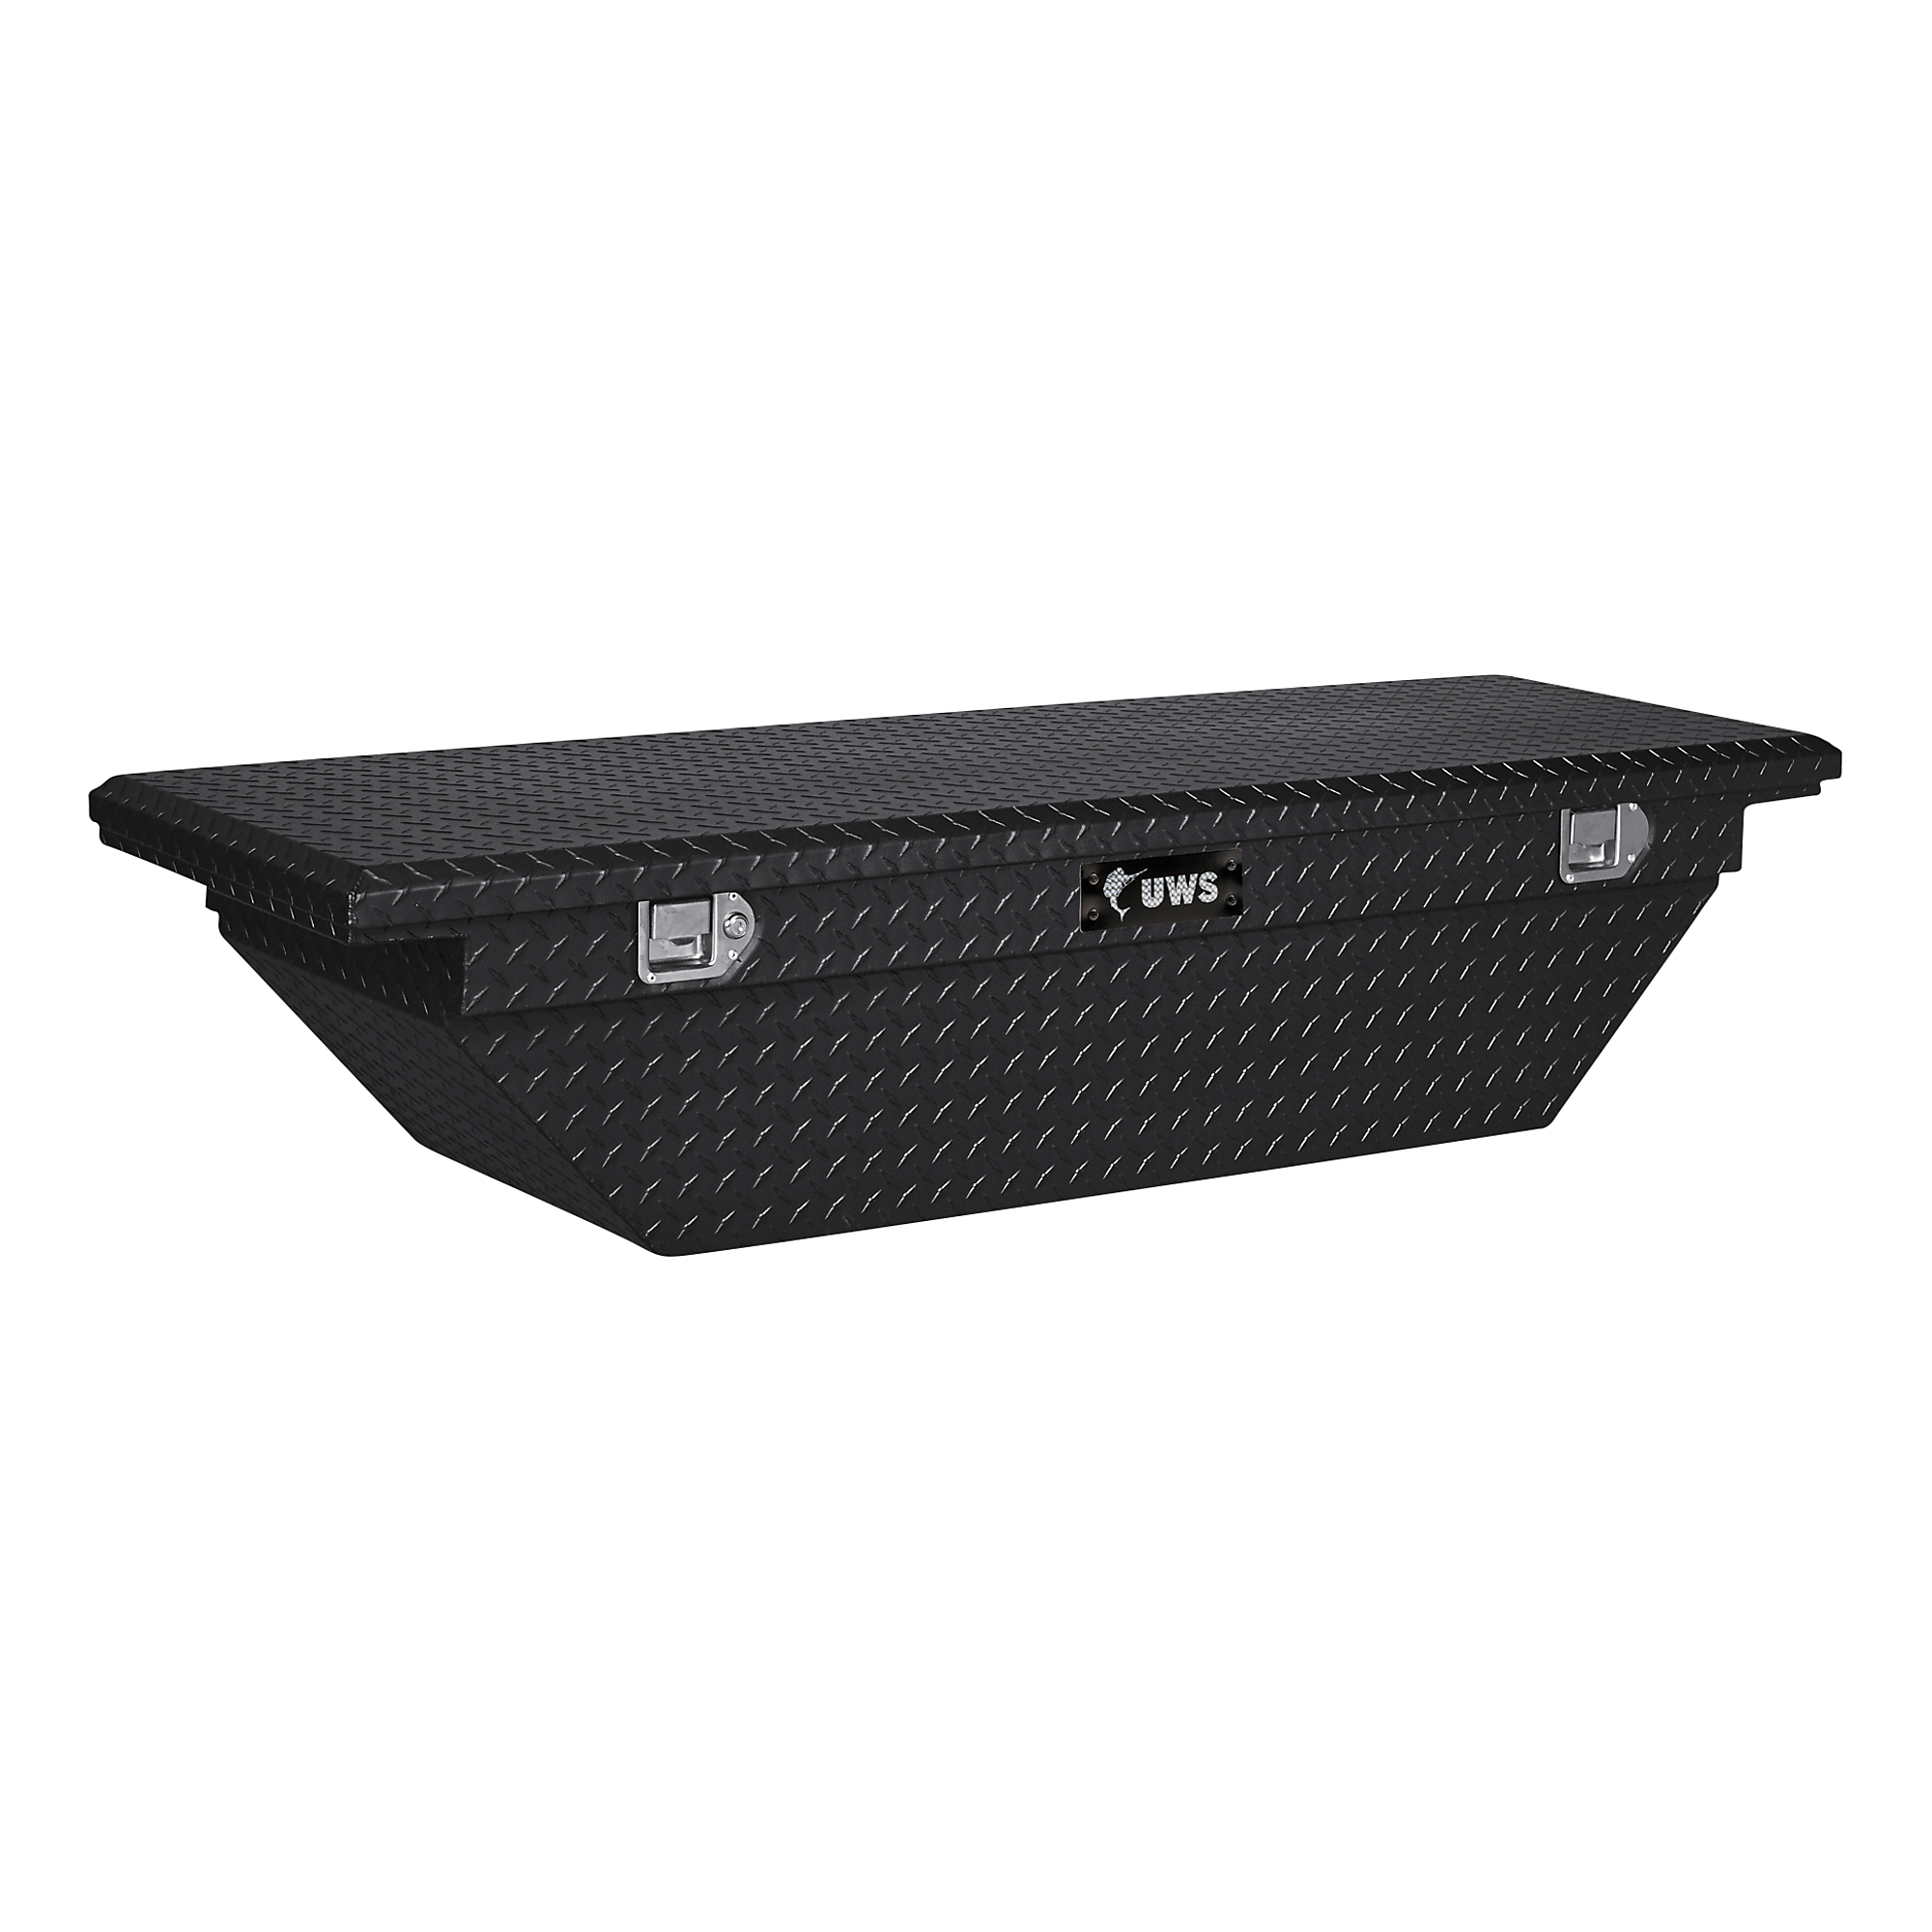 UWS, 63Inch Angled Crossover Truck Tool Box, Width 63.875 in, Material Aluminum, Color Finish Gloss Black, Model EC10302